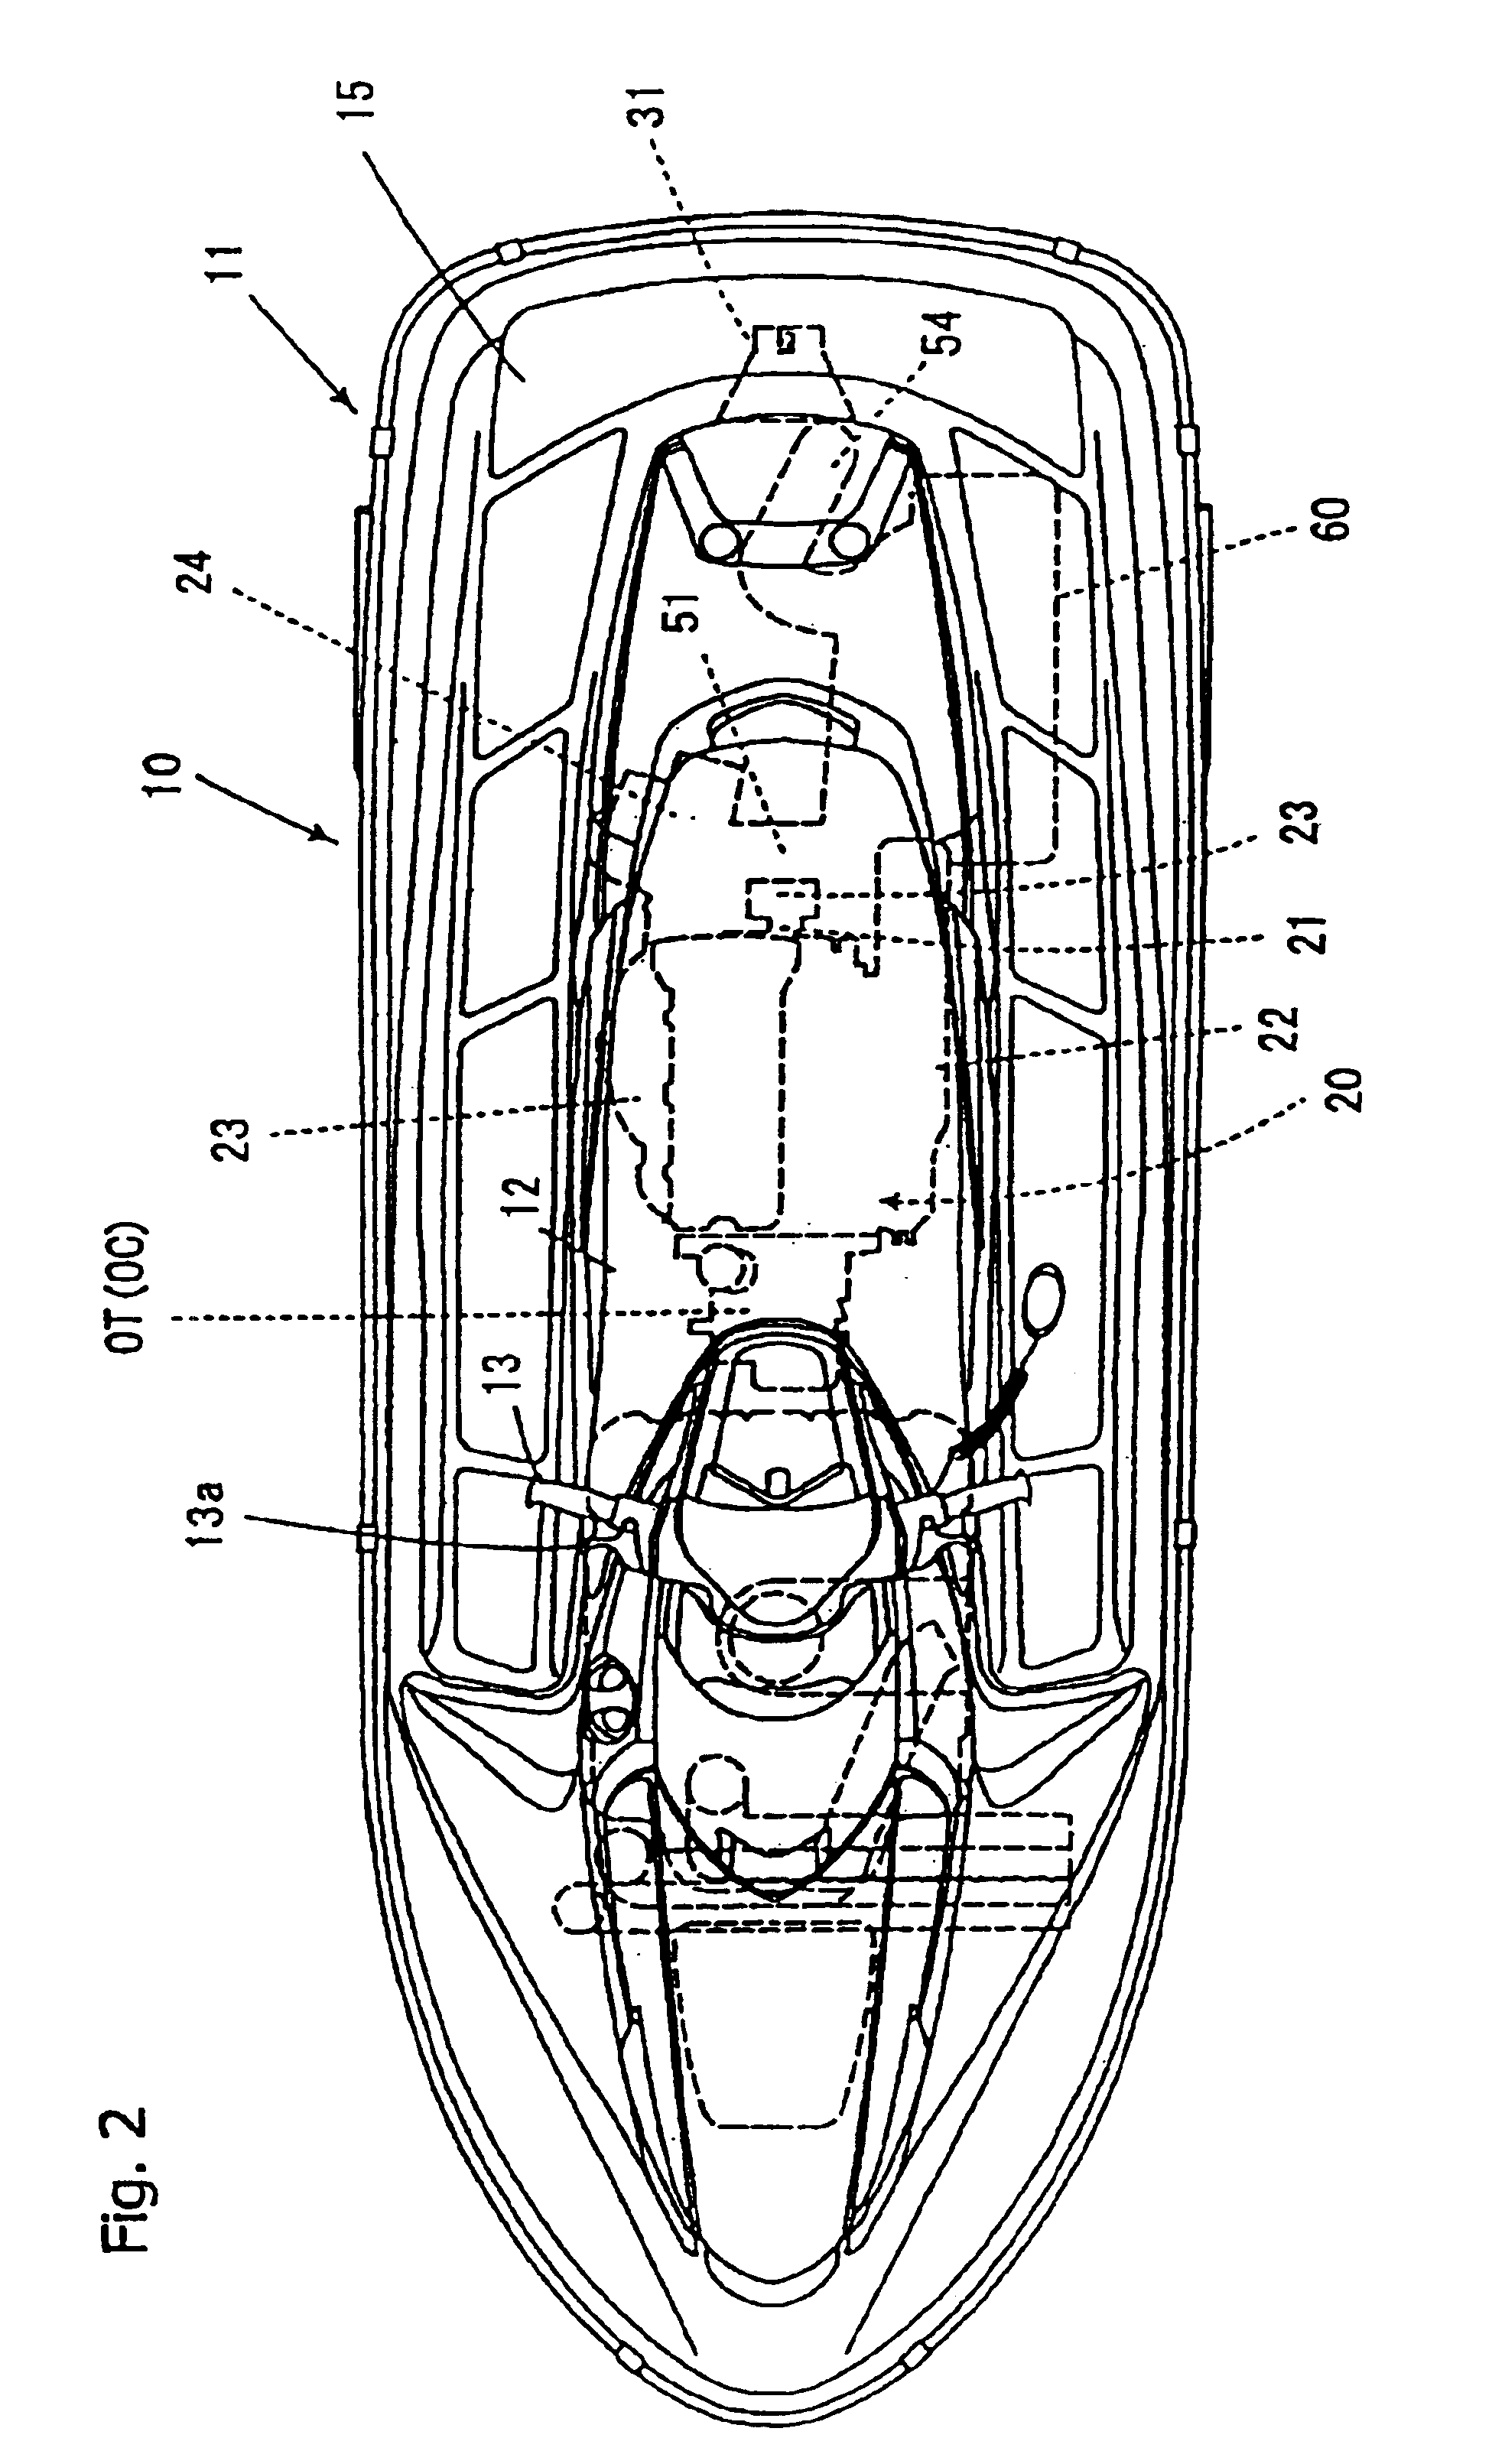 Conduit-supporting structure for a small watercraft